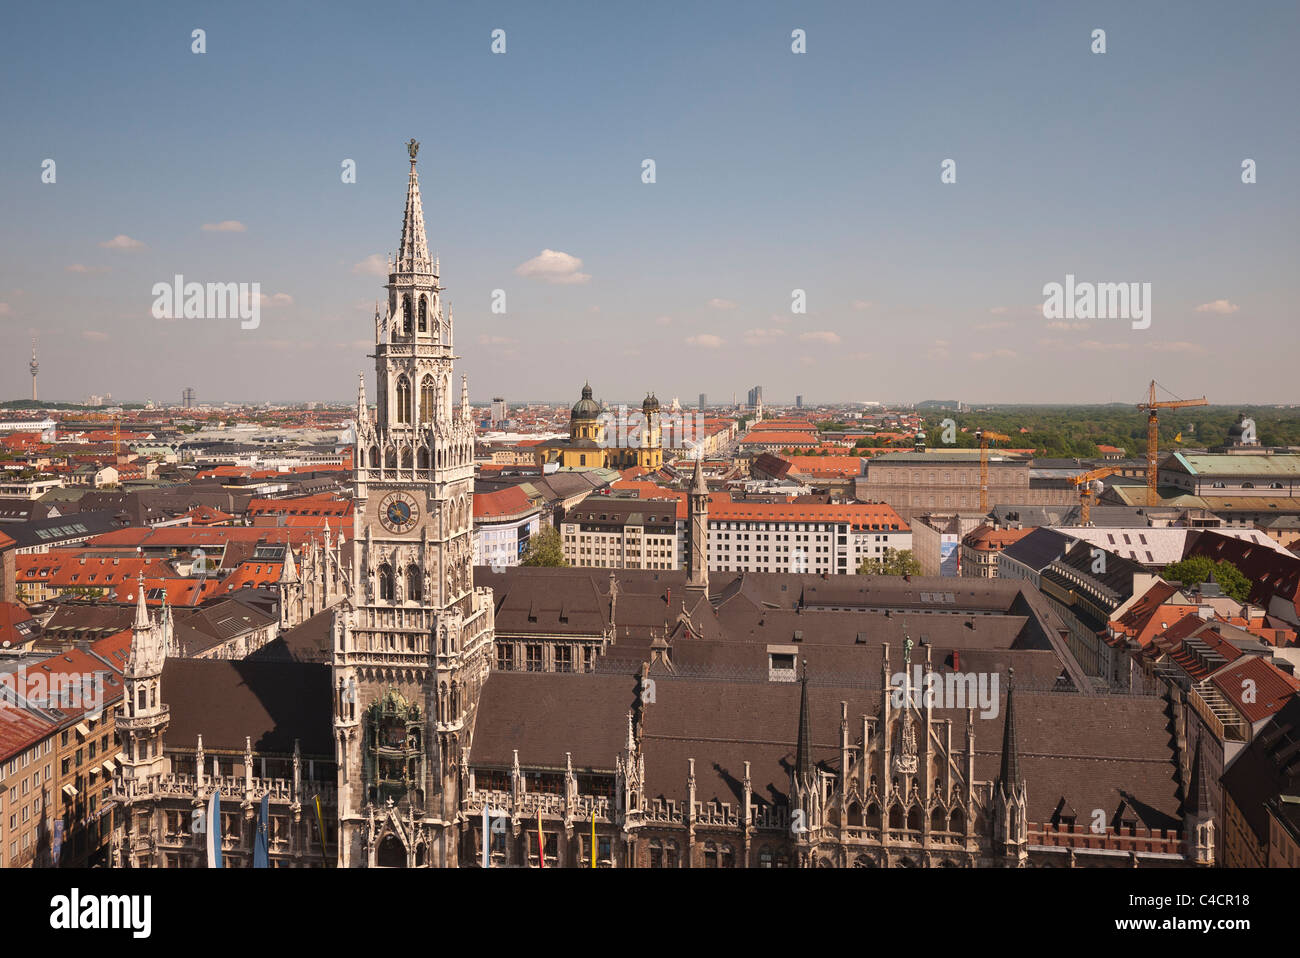 A view of the top of the New City Hall, Neues  Rathaus, with roof and towers of other buildings visible in Munich, Germany. Stock Photo